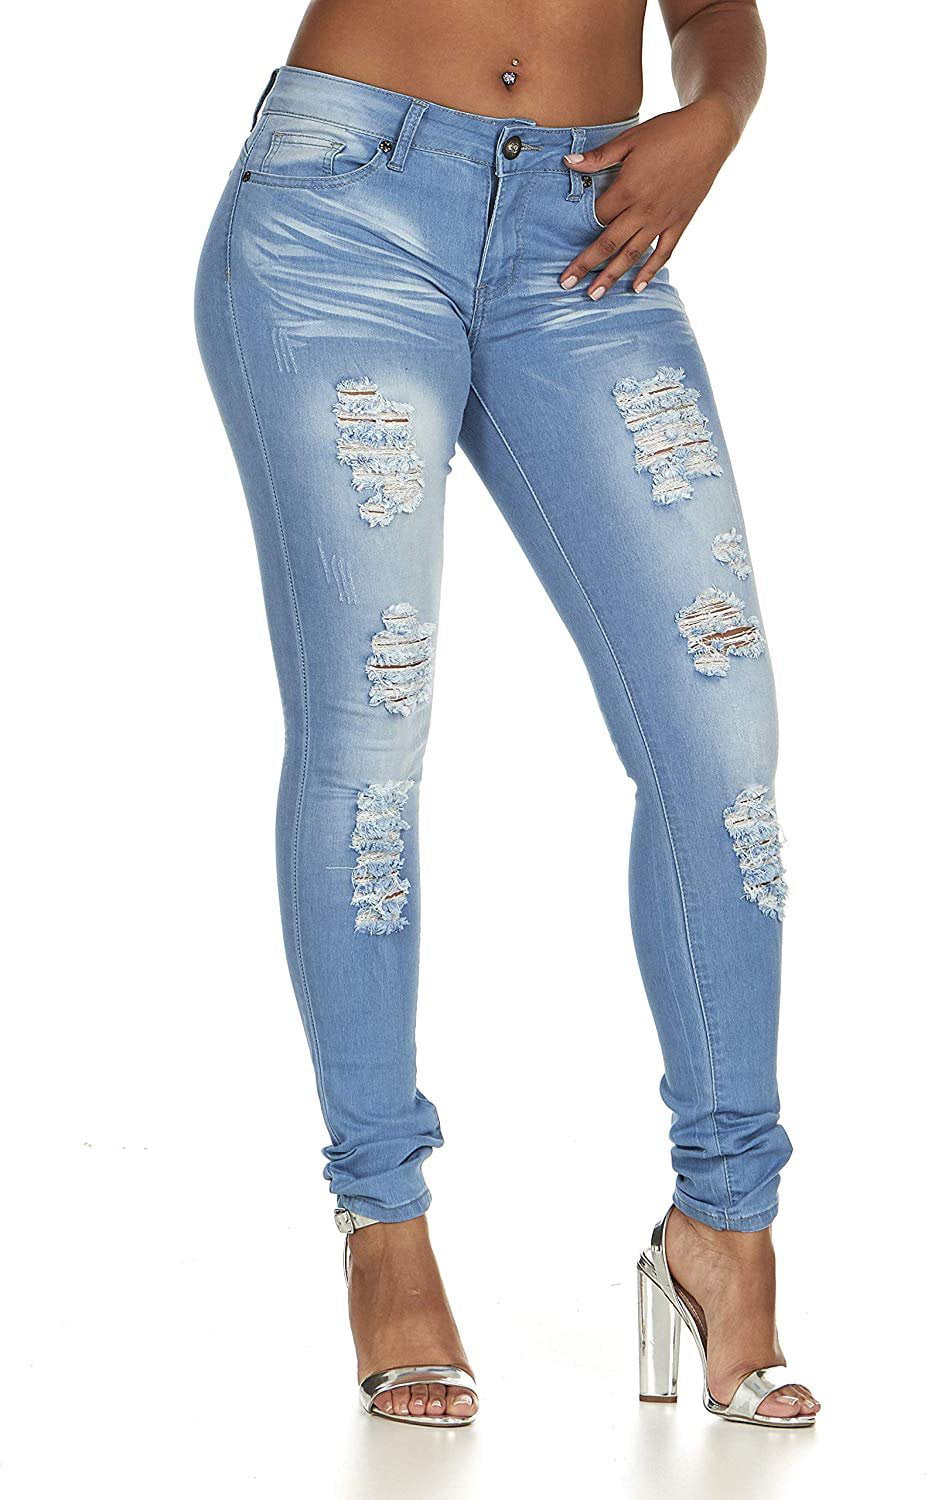 VIP Jeans - Cute Ripped Jeans for Women Distressed Washed Skinny Long ...